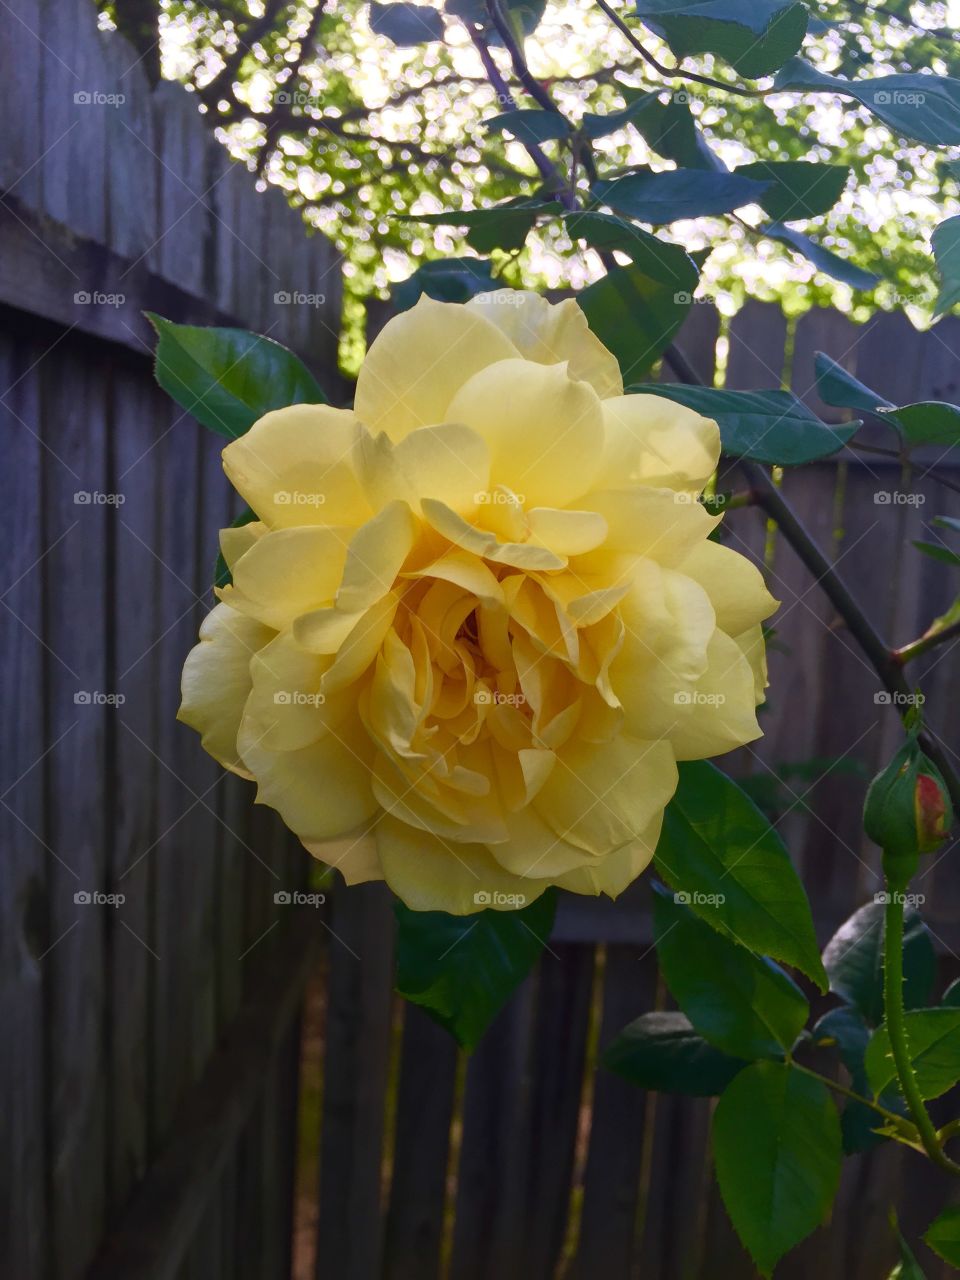 Beautiful yellow rose with wood fence as backdrop and tree.